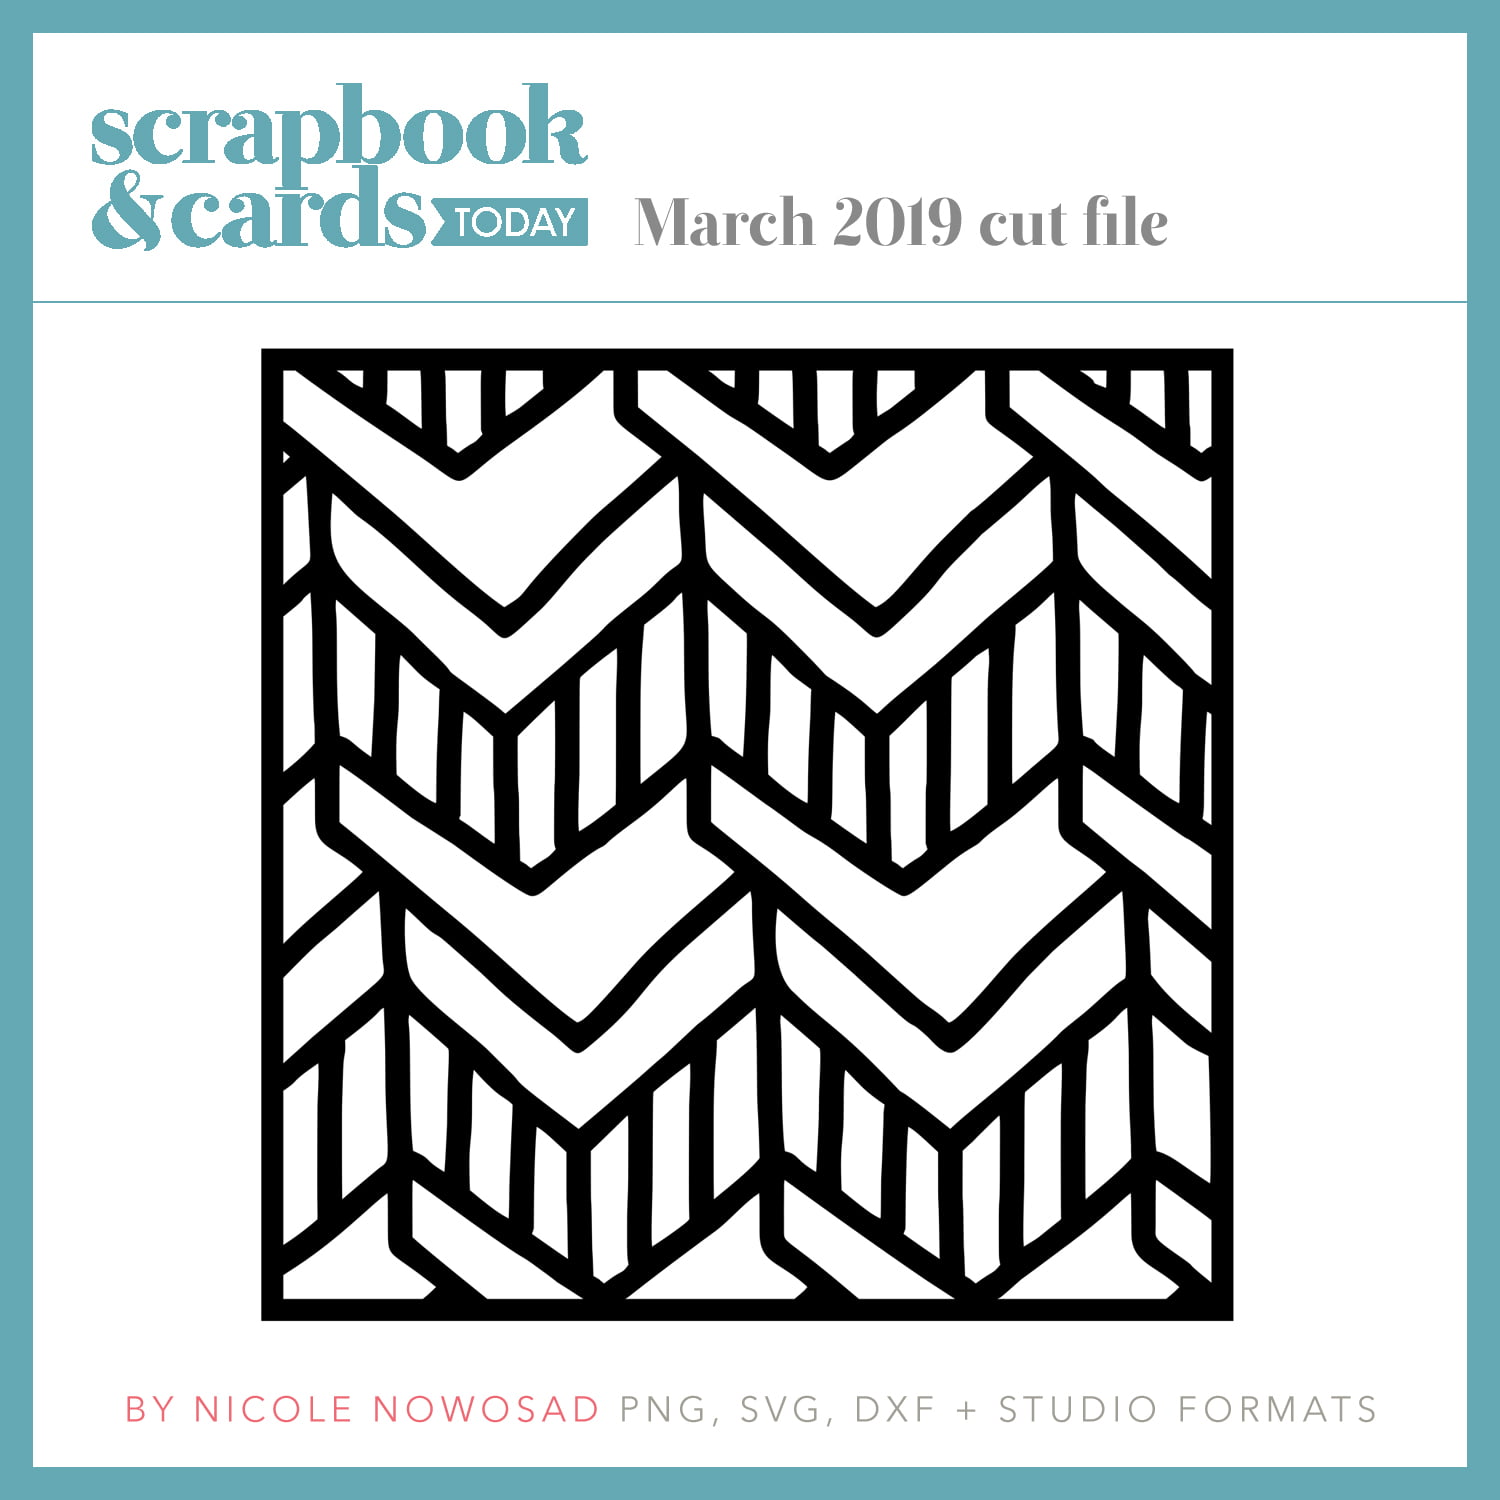 March 2019 cut file freebie from Scrapbook & Cards Today